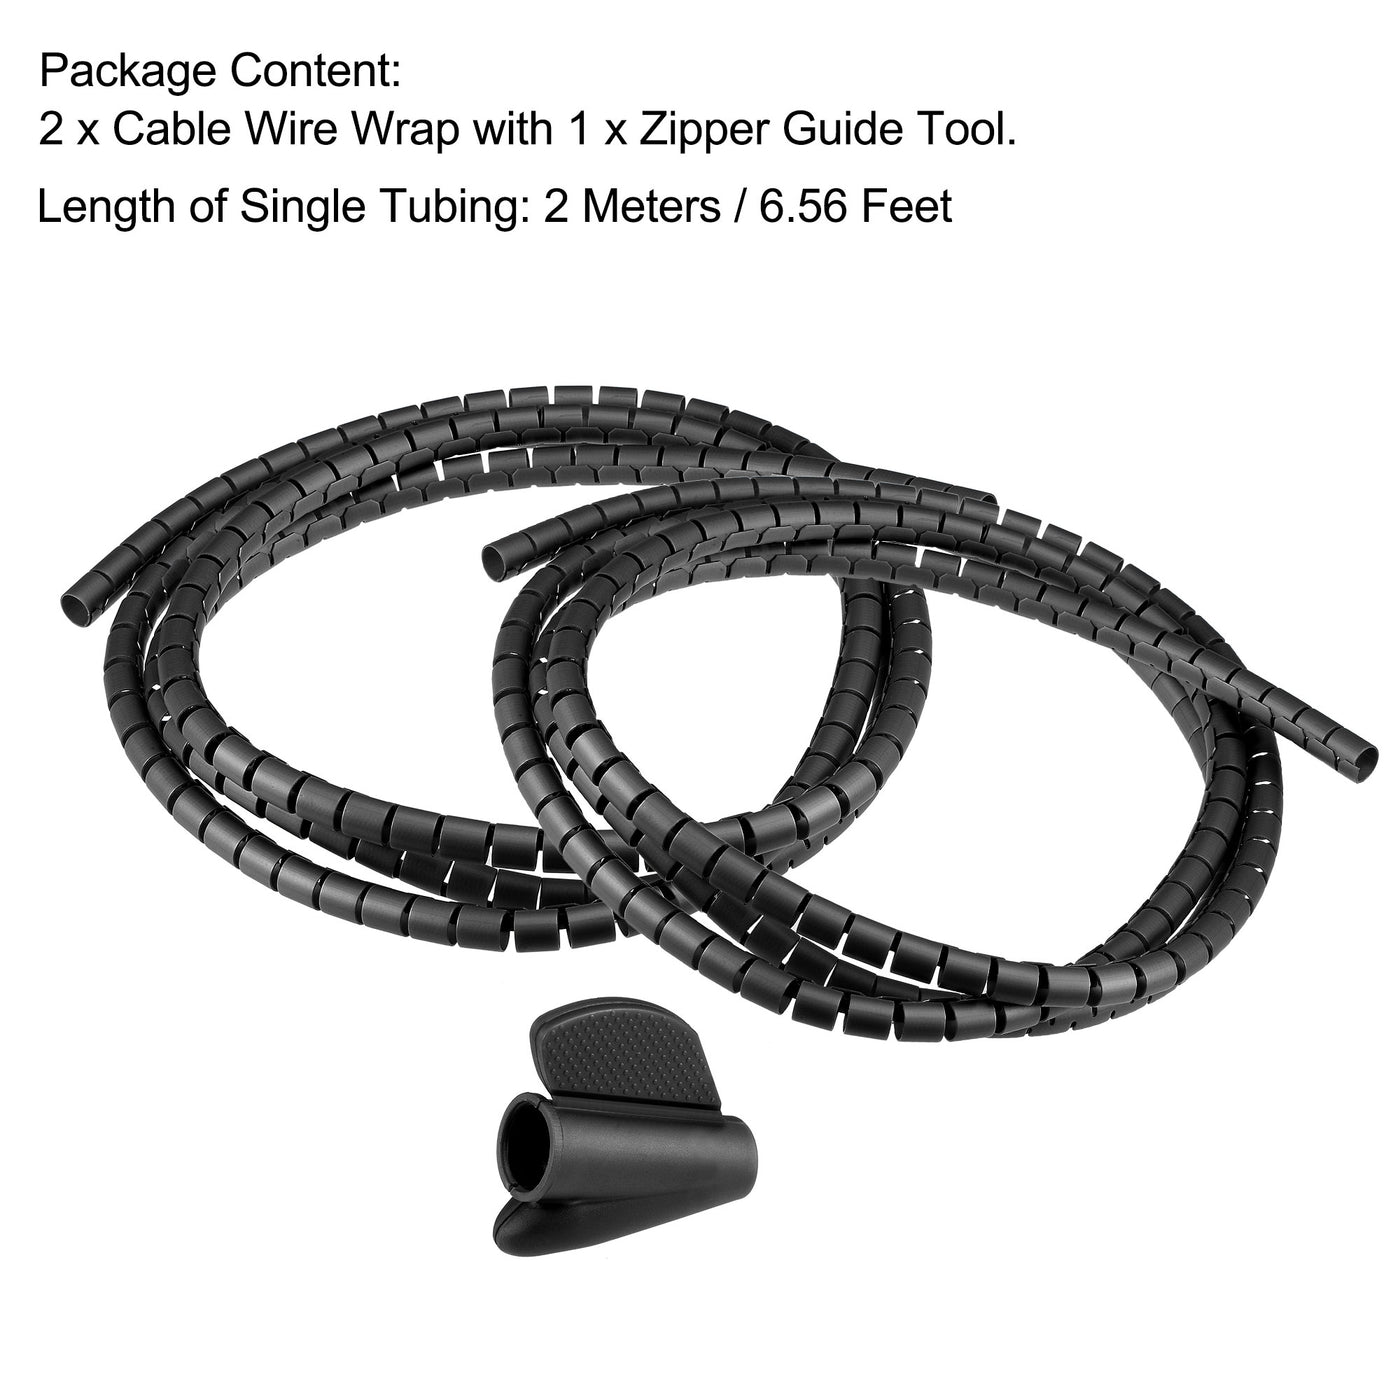 uxcell Uxcell 12mm Split Cable Wire Wrap for Cord Management Black 2 Meters with Zipper 2 pcs